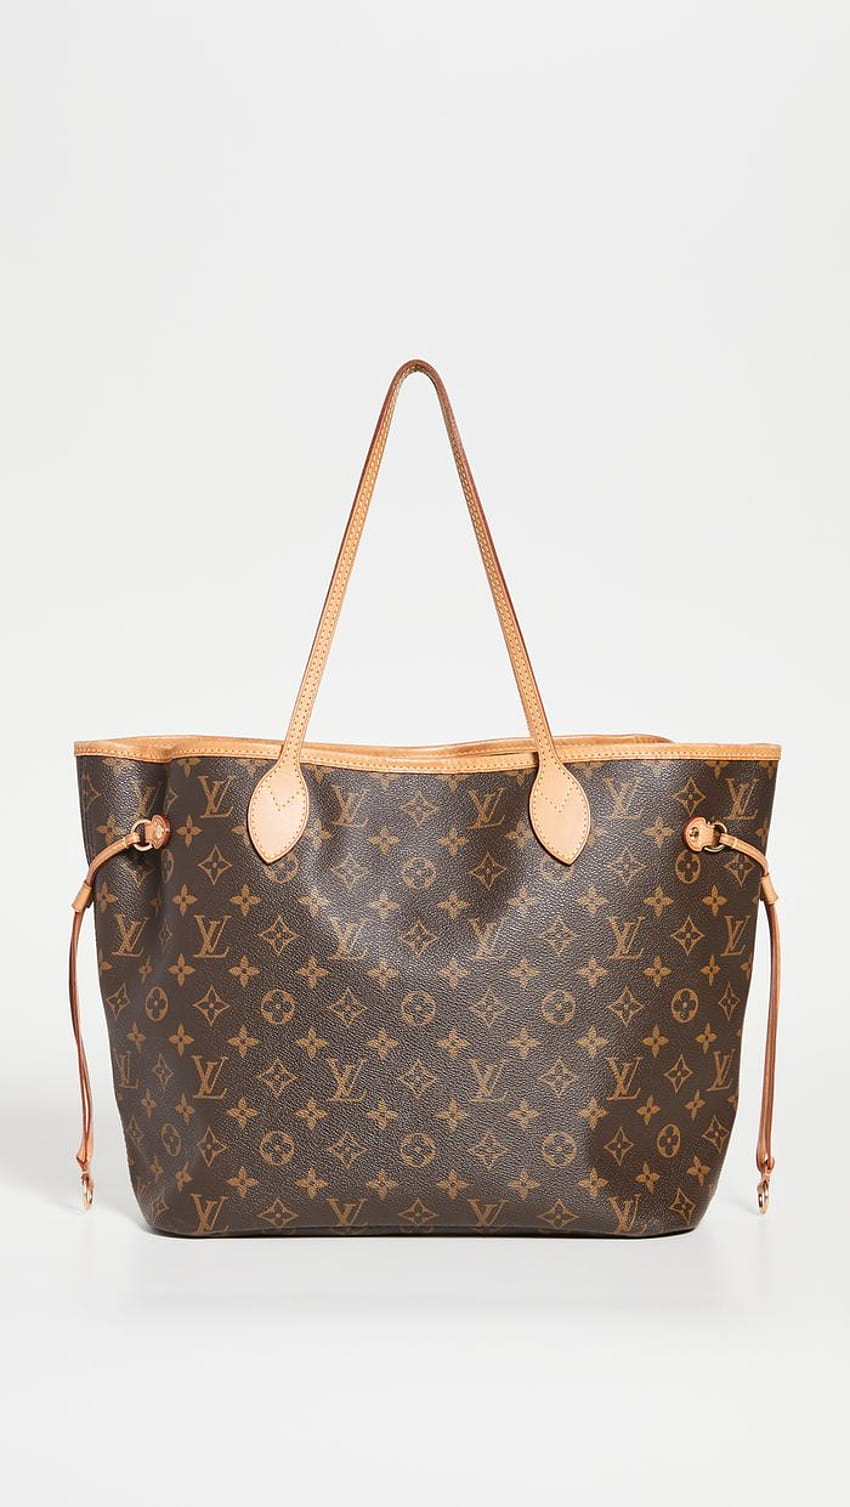 The 10 Most Popular Louis Vuitton Bags of All Time  Street style bags Louis  vuitton bag Louis vuitton